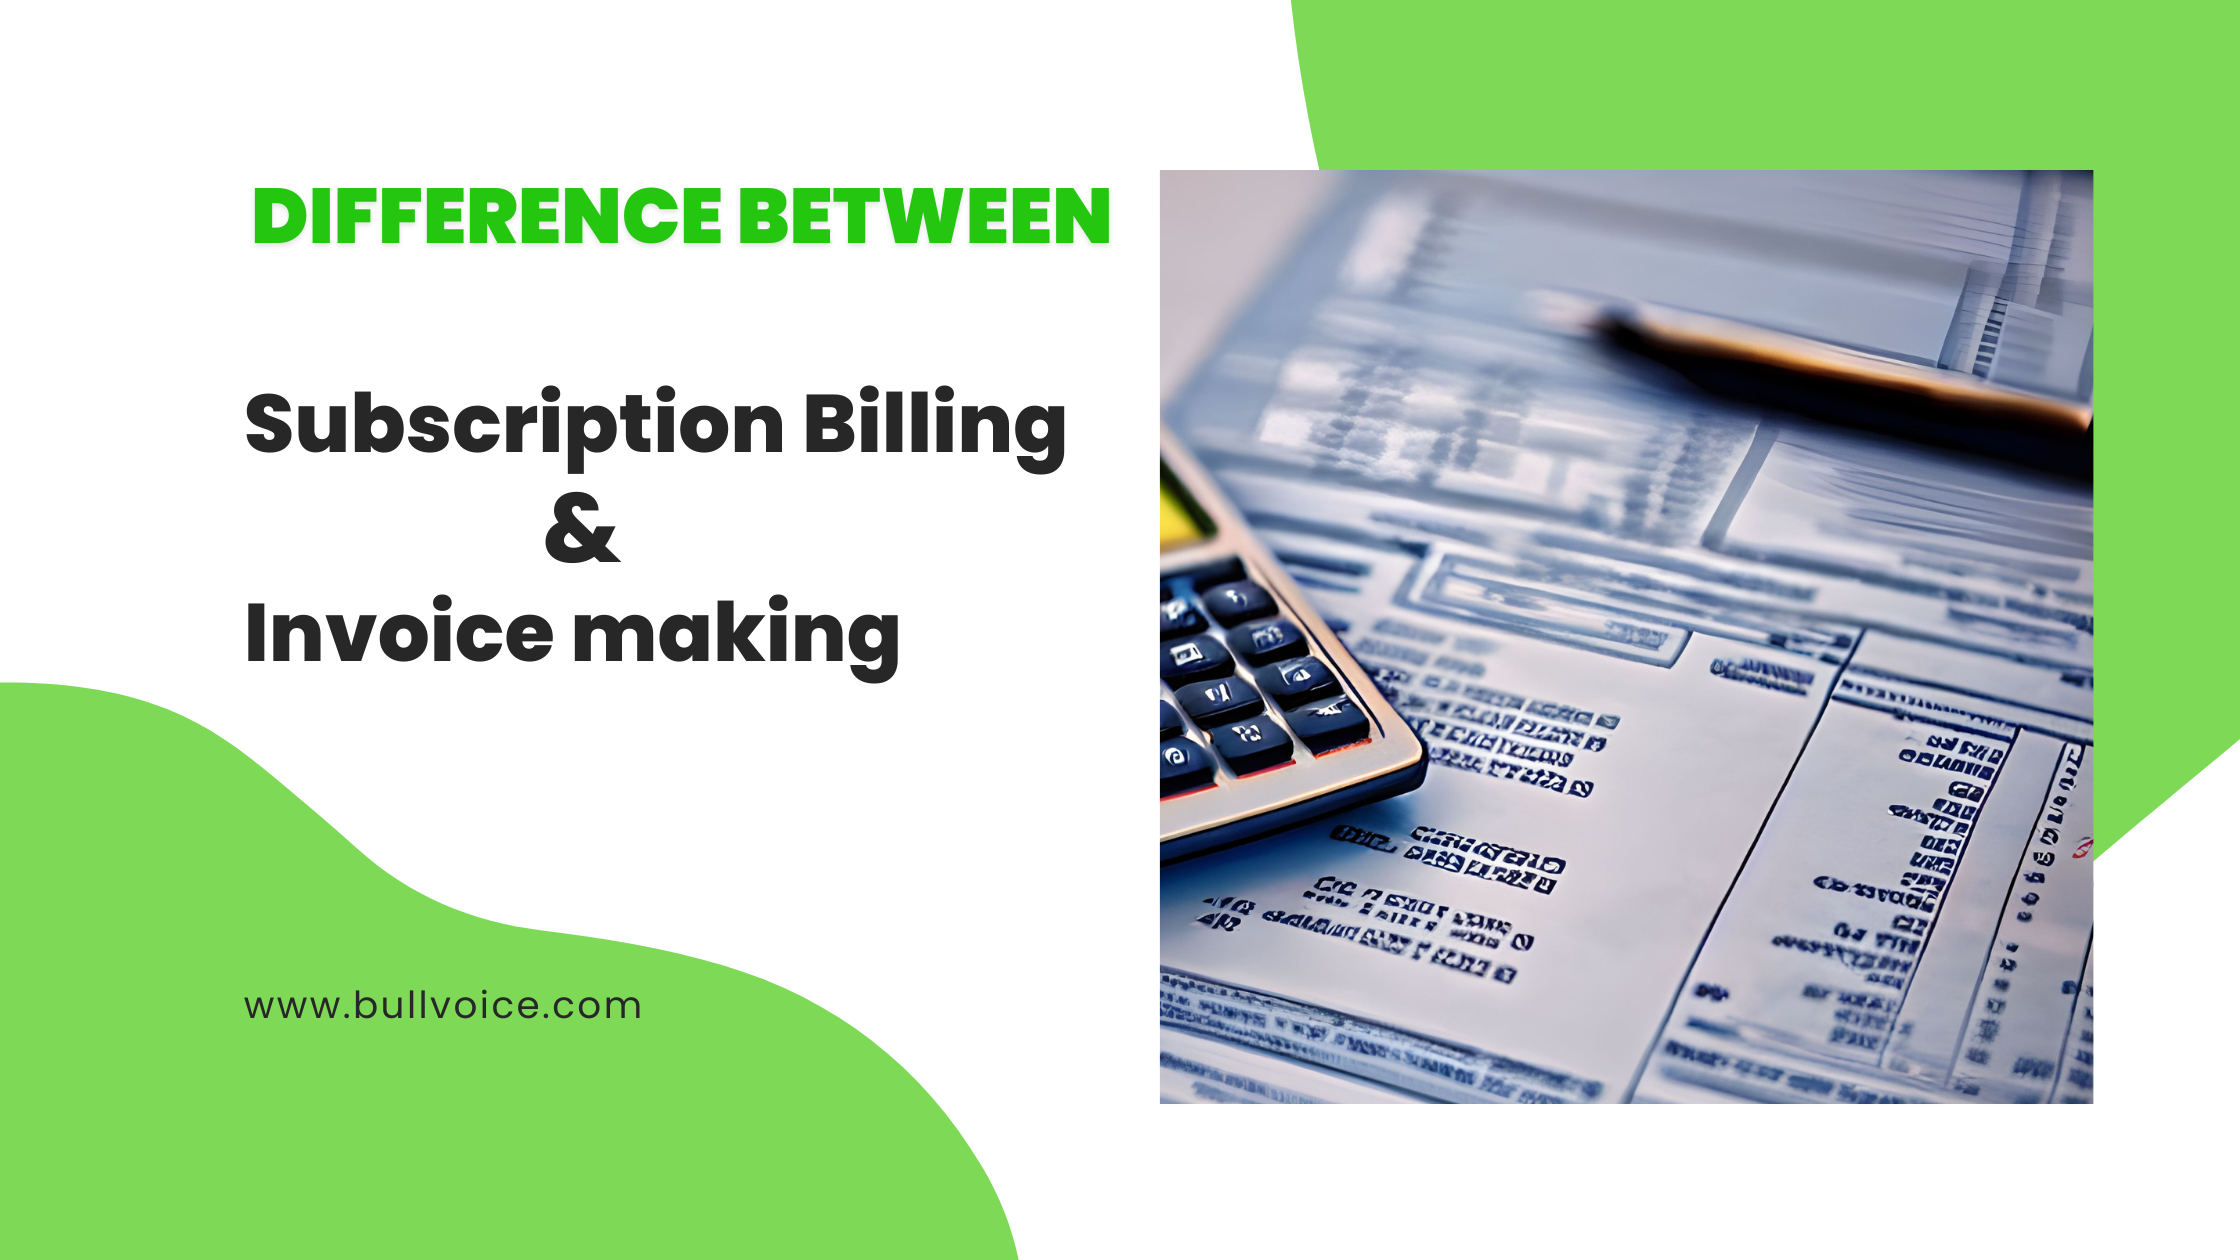 Difference between Subscription Billing and Invoice making